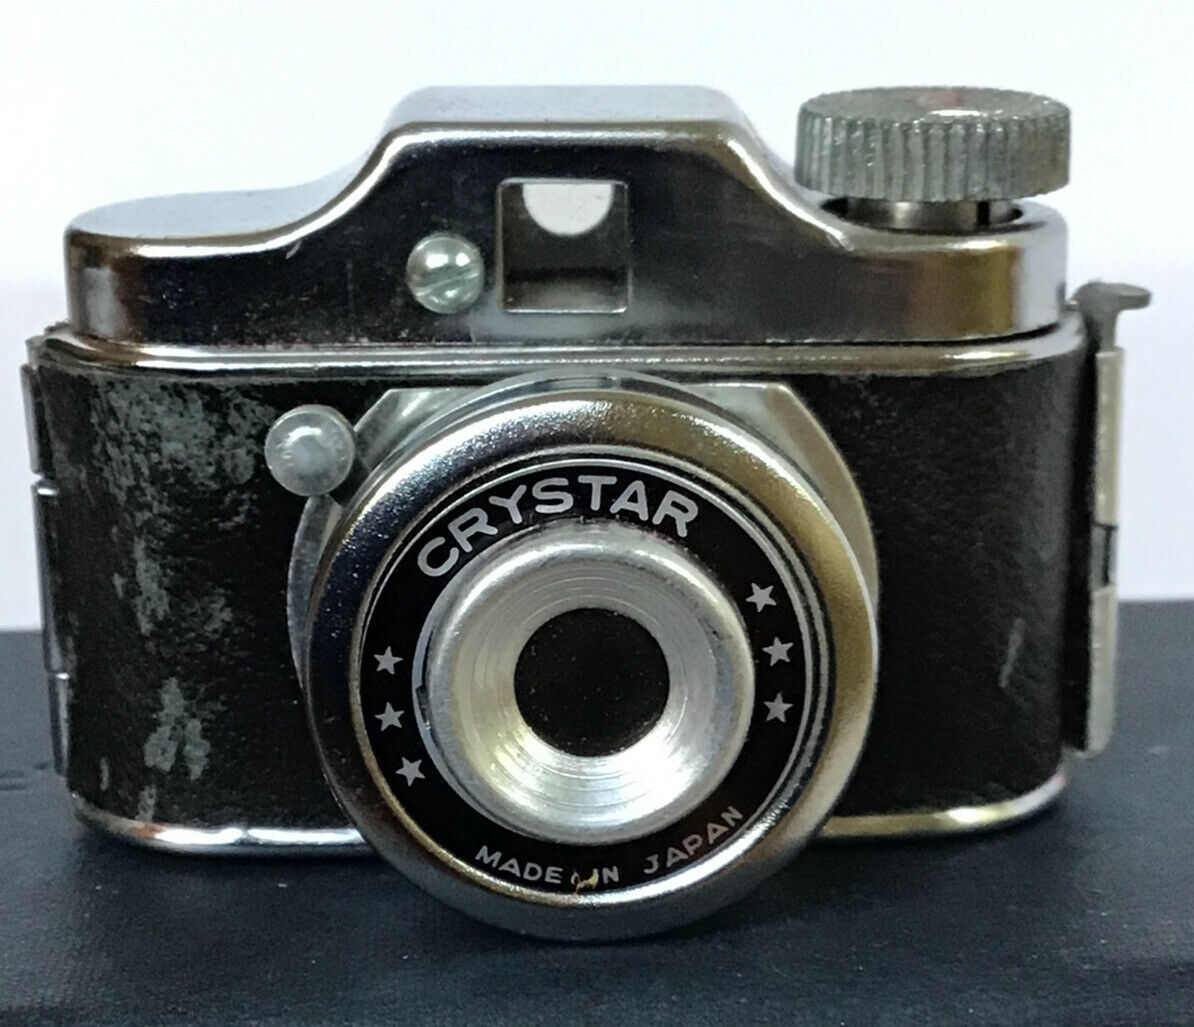 Crystar Mini Vintage Spy Camera Made In Japan Miniature Mint Condition